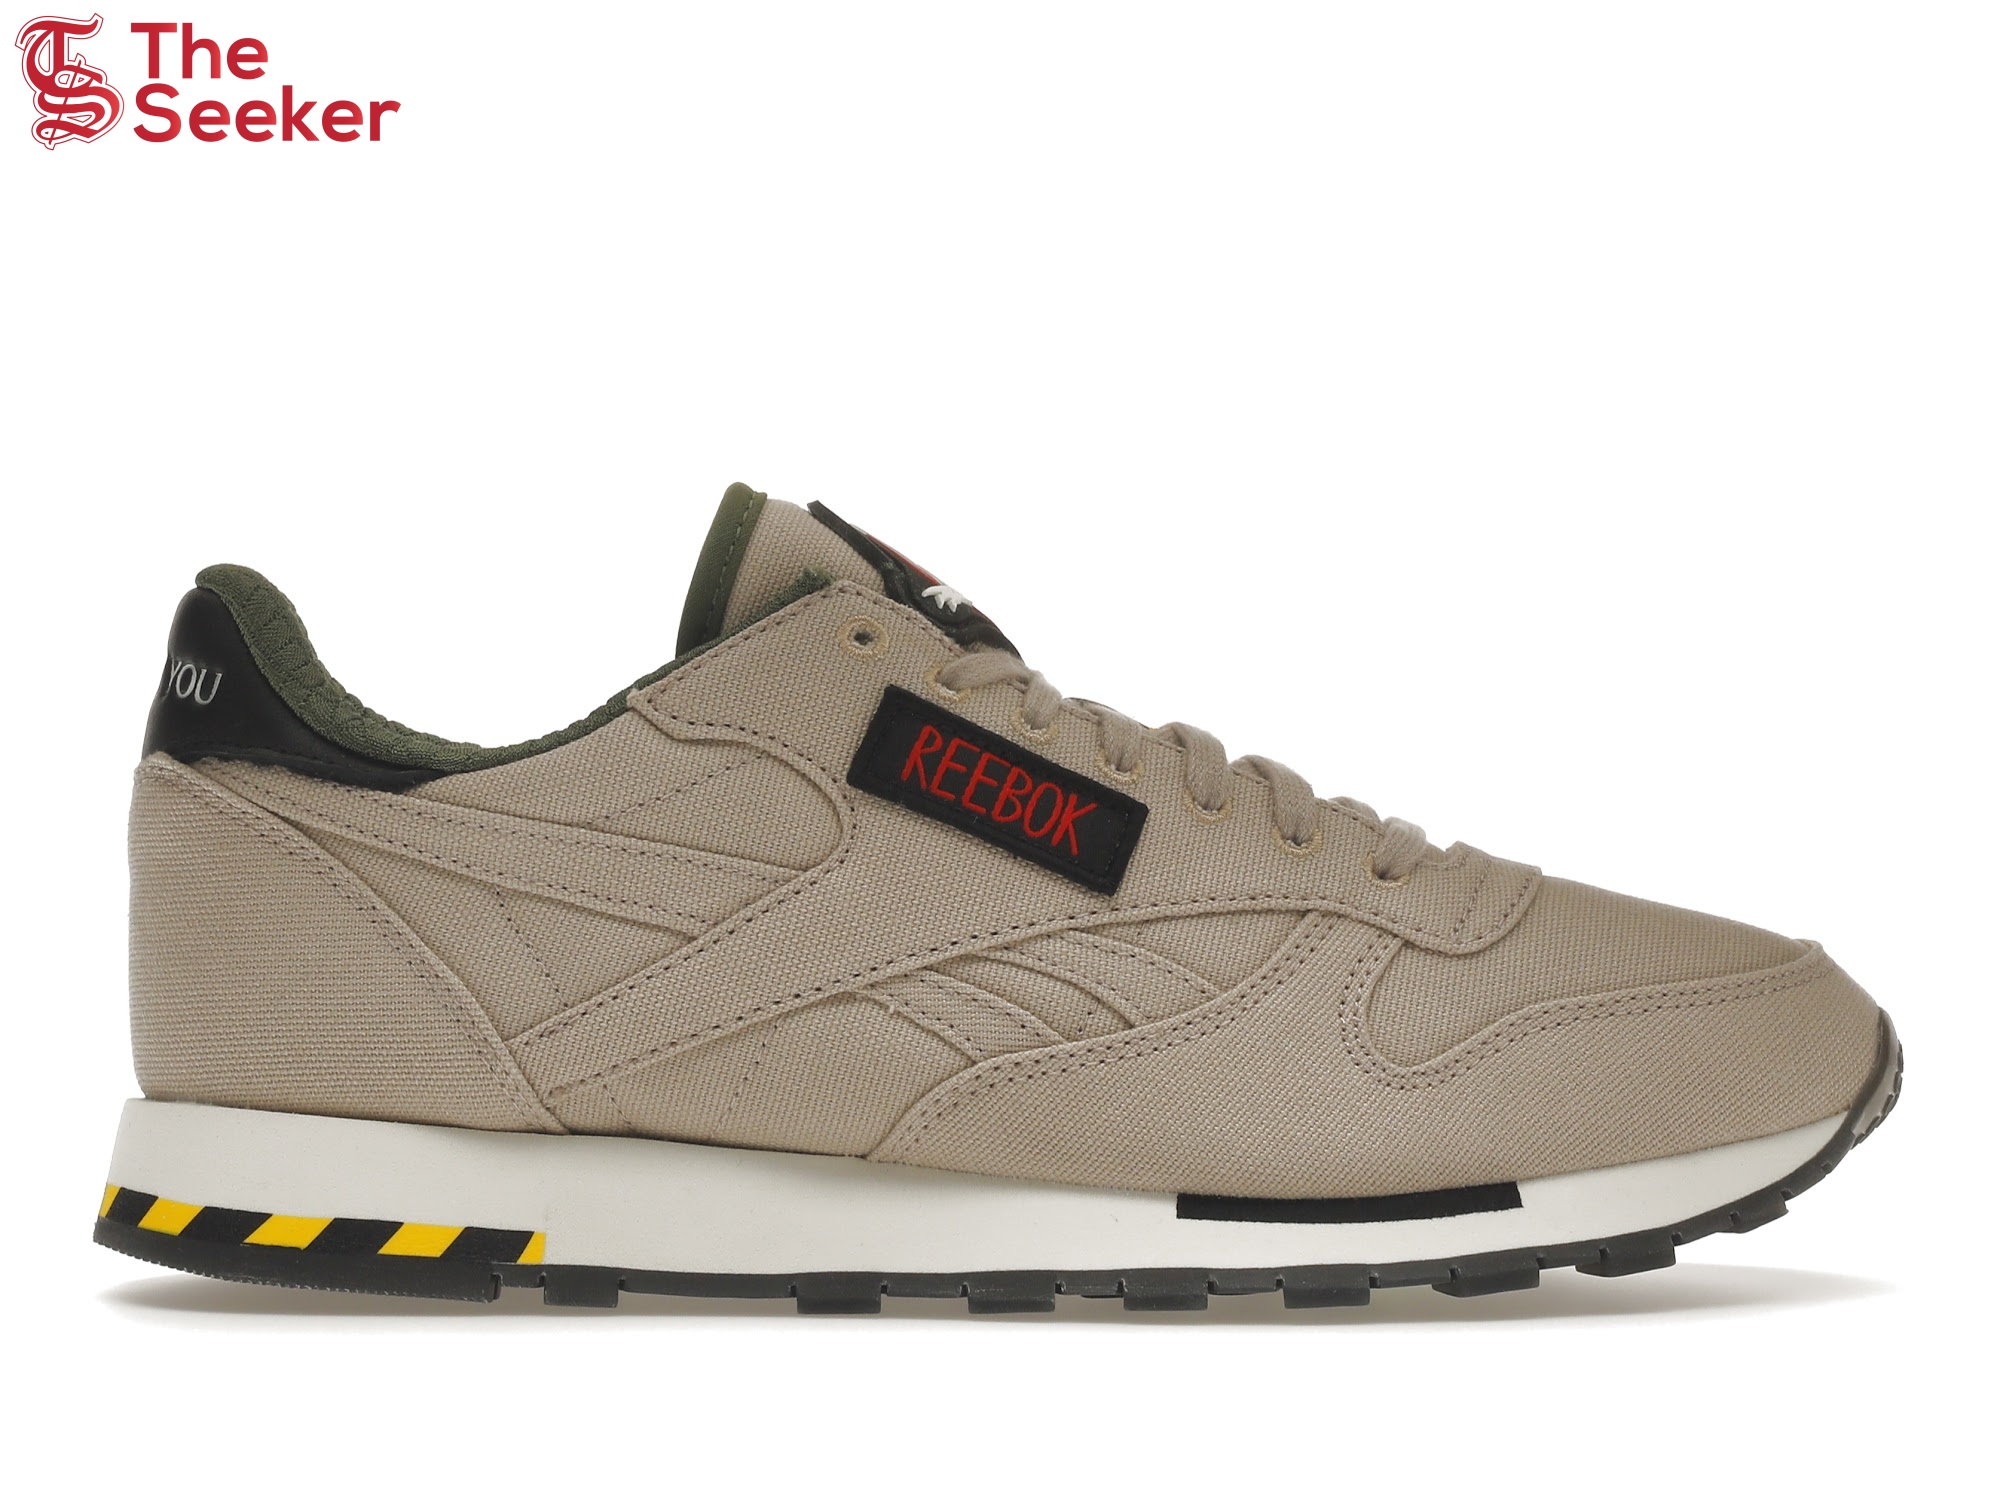 Reebok Classic Leather Ghostbusters